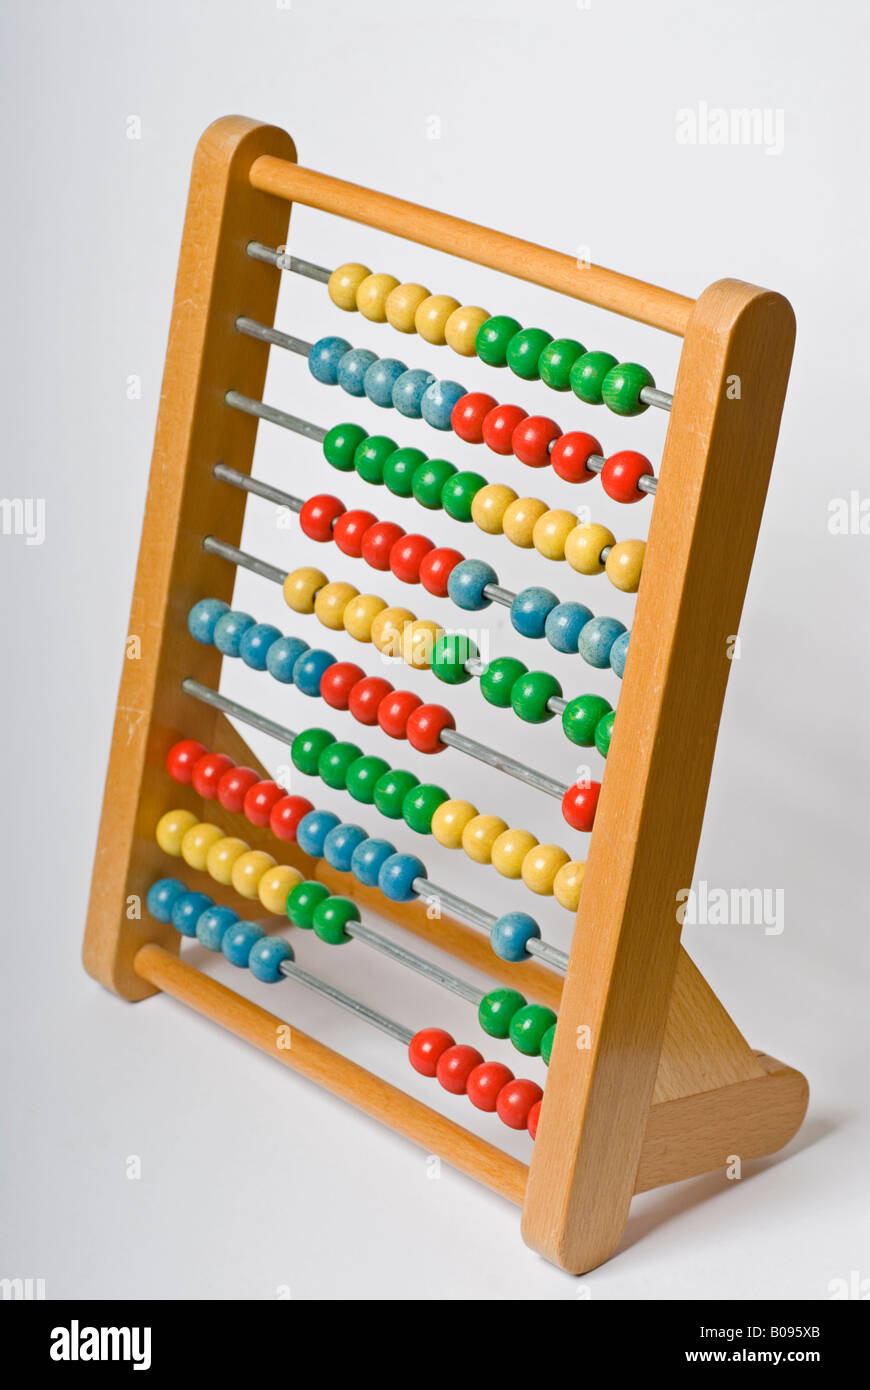 Stock photo of a childs abacus with coloured counting beads Stock Photo